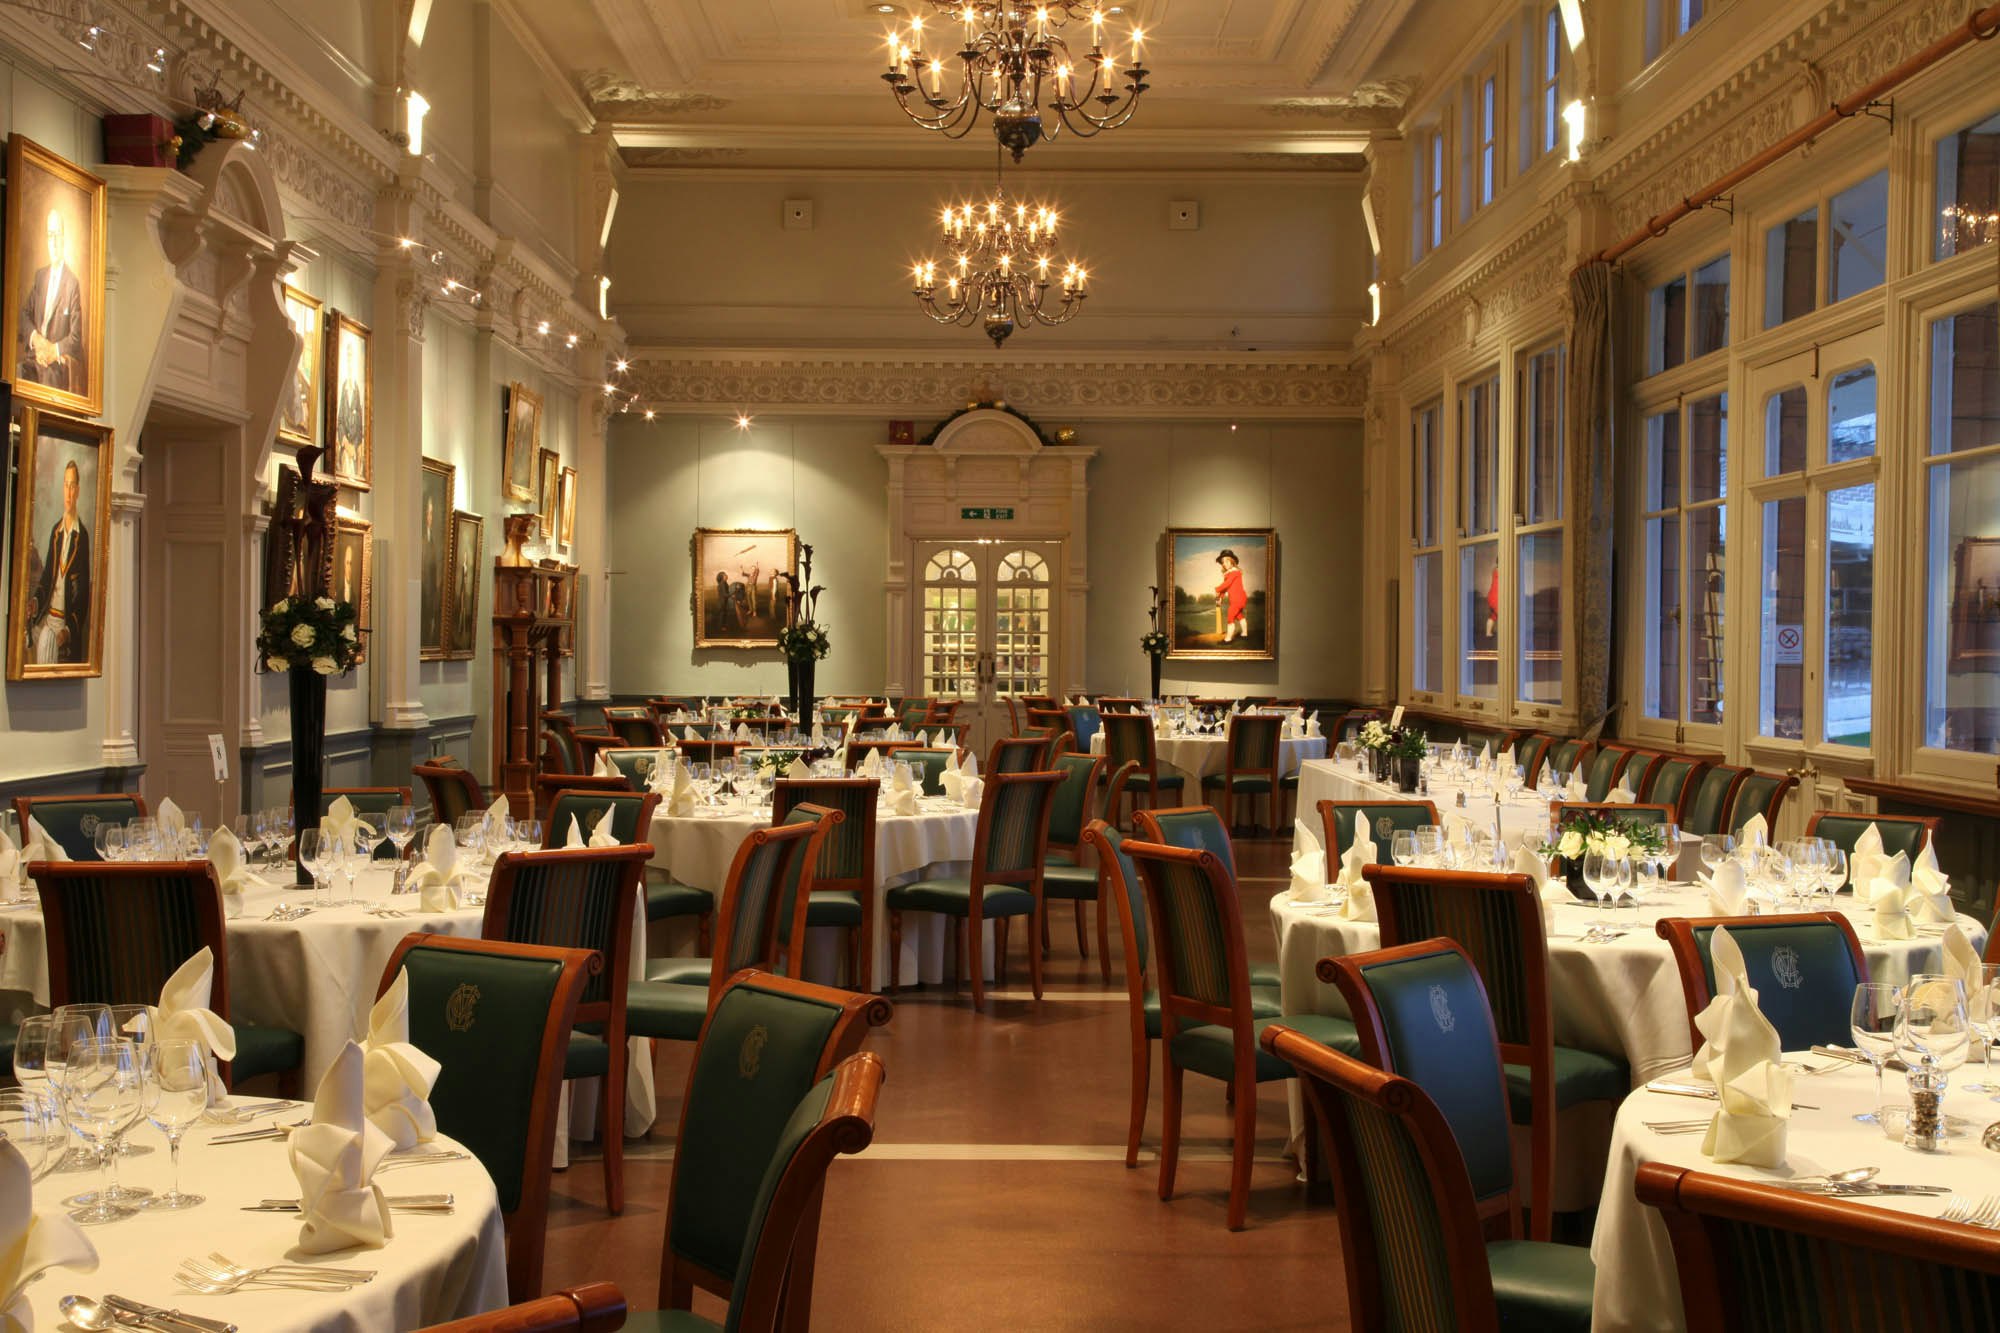 The Long Room, London - Lord's Cricket Ground